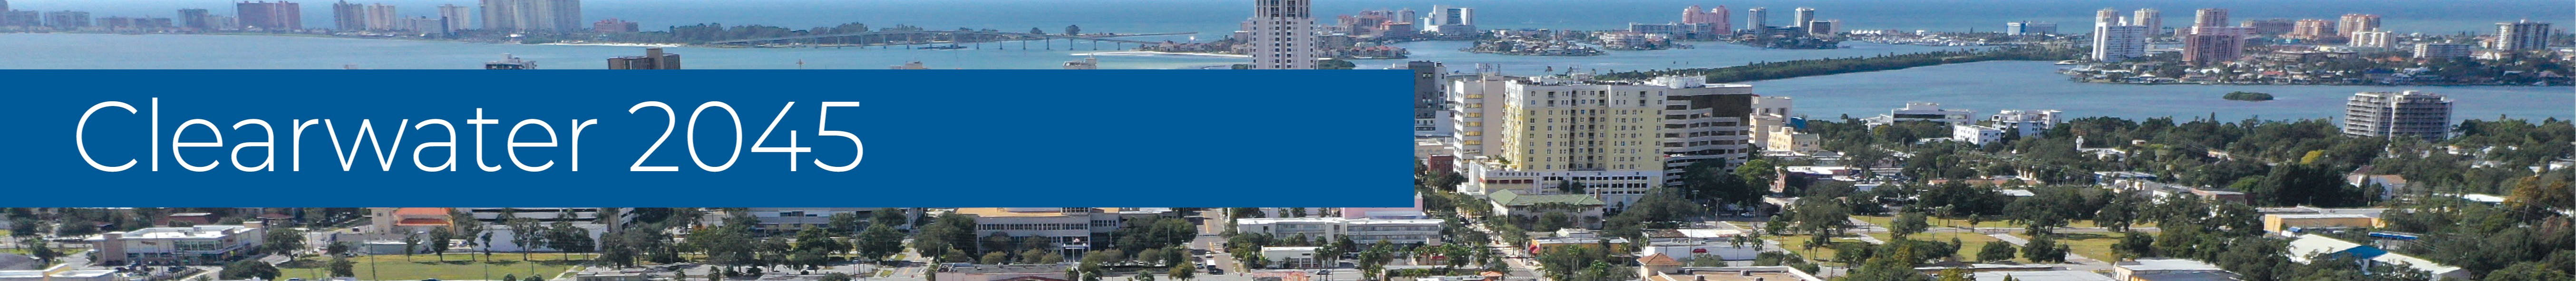 Aerial image of Clearwater looking west towards the beach and Memorial Causeway. Text over image says "Clearwater 2045".